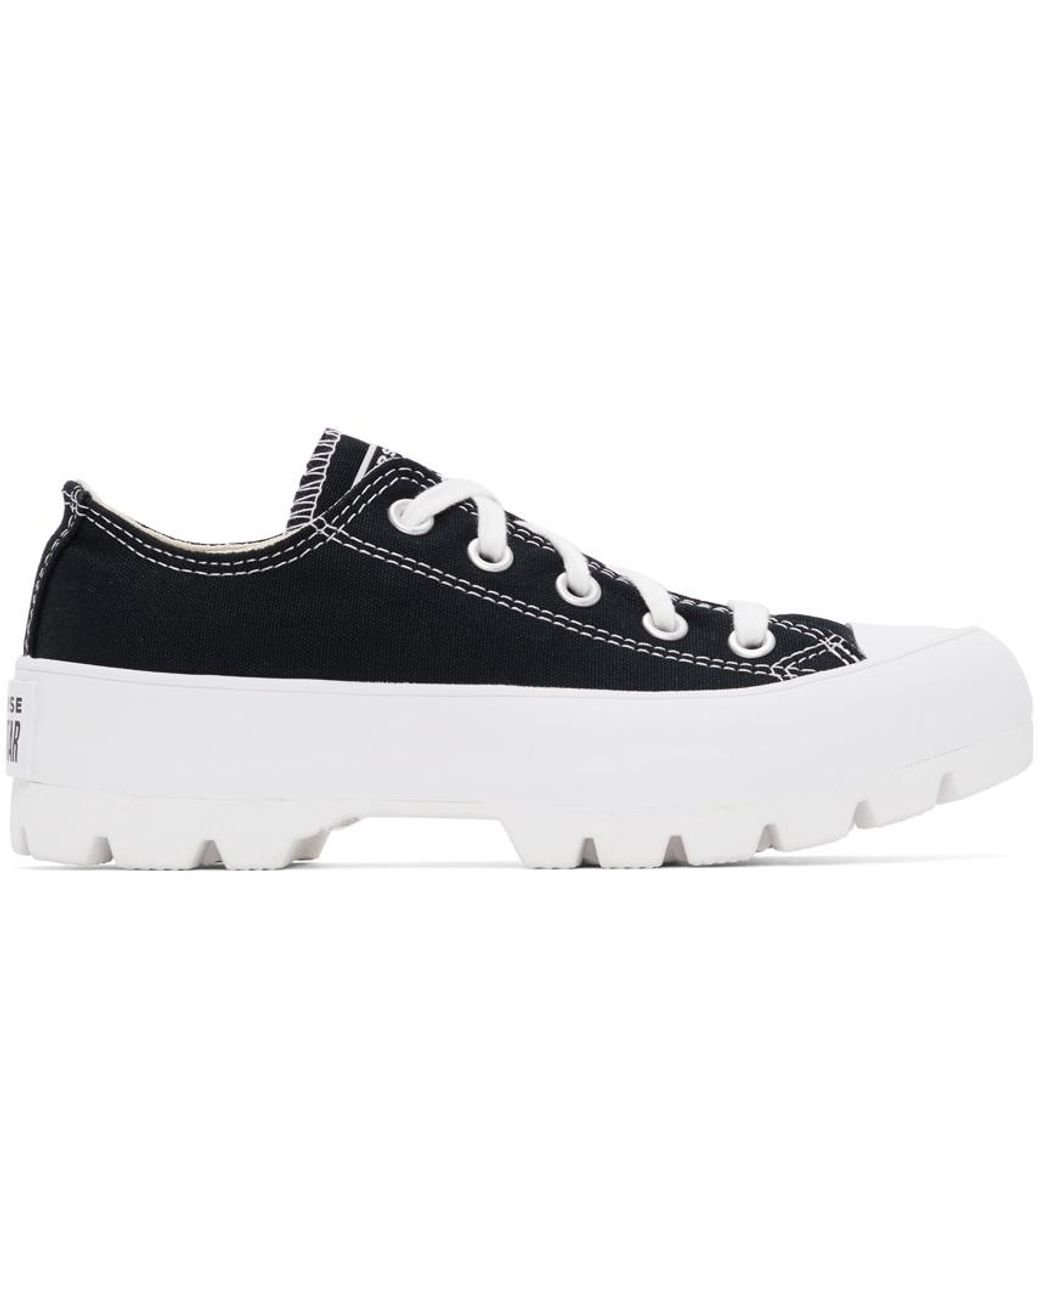 Converse lugged Chuck Taylor All Star Low Sneakers in Black | Lyst Australia